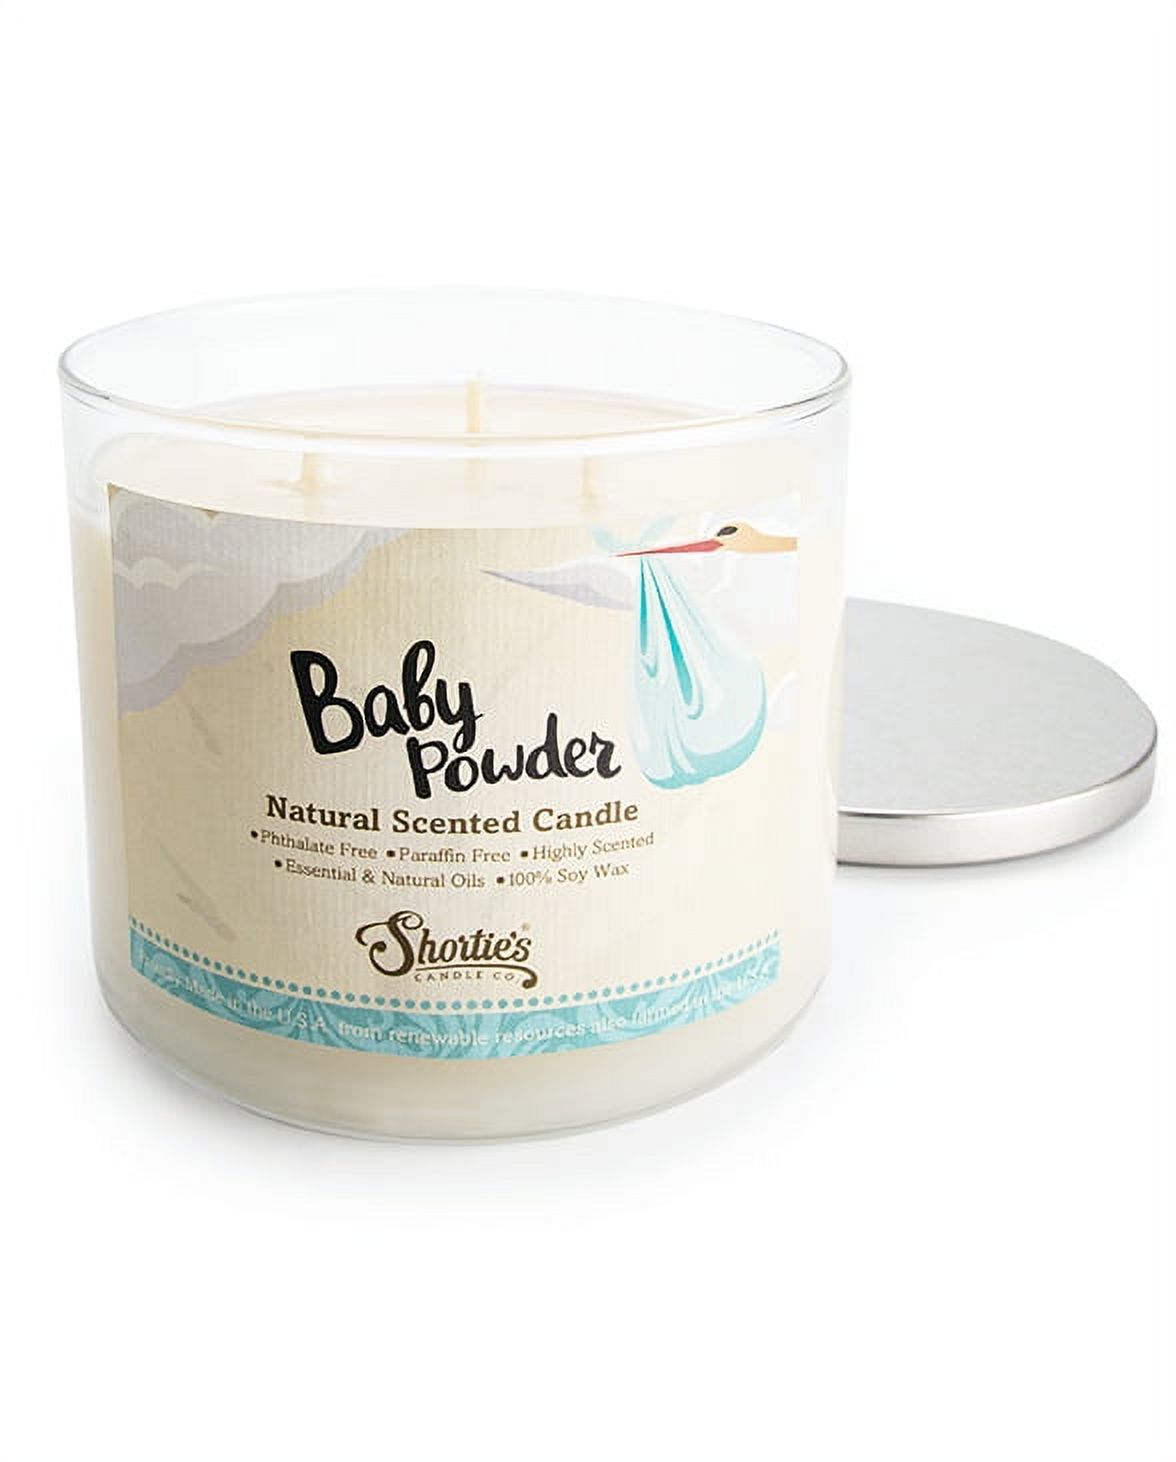 Baby Powder Scented 3 Wick Candle - All Natural - Made with 100%  Responsibly Sourced Soy and Essential Fragrance Oils - Phthalate & Paraffin  Free